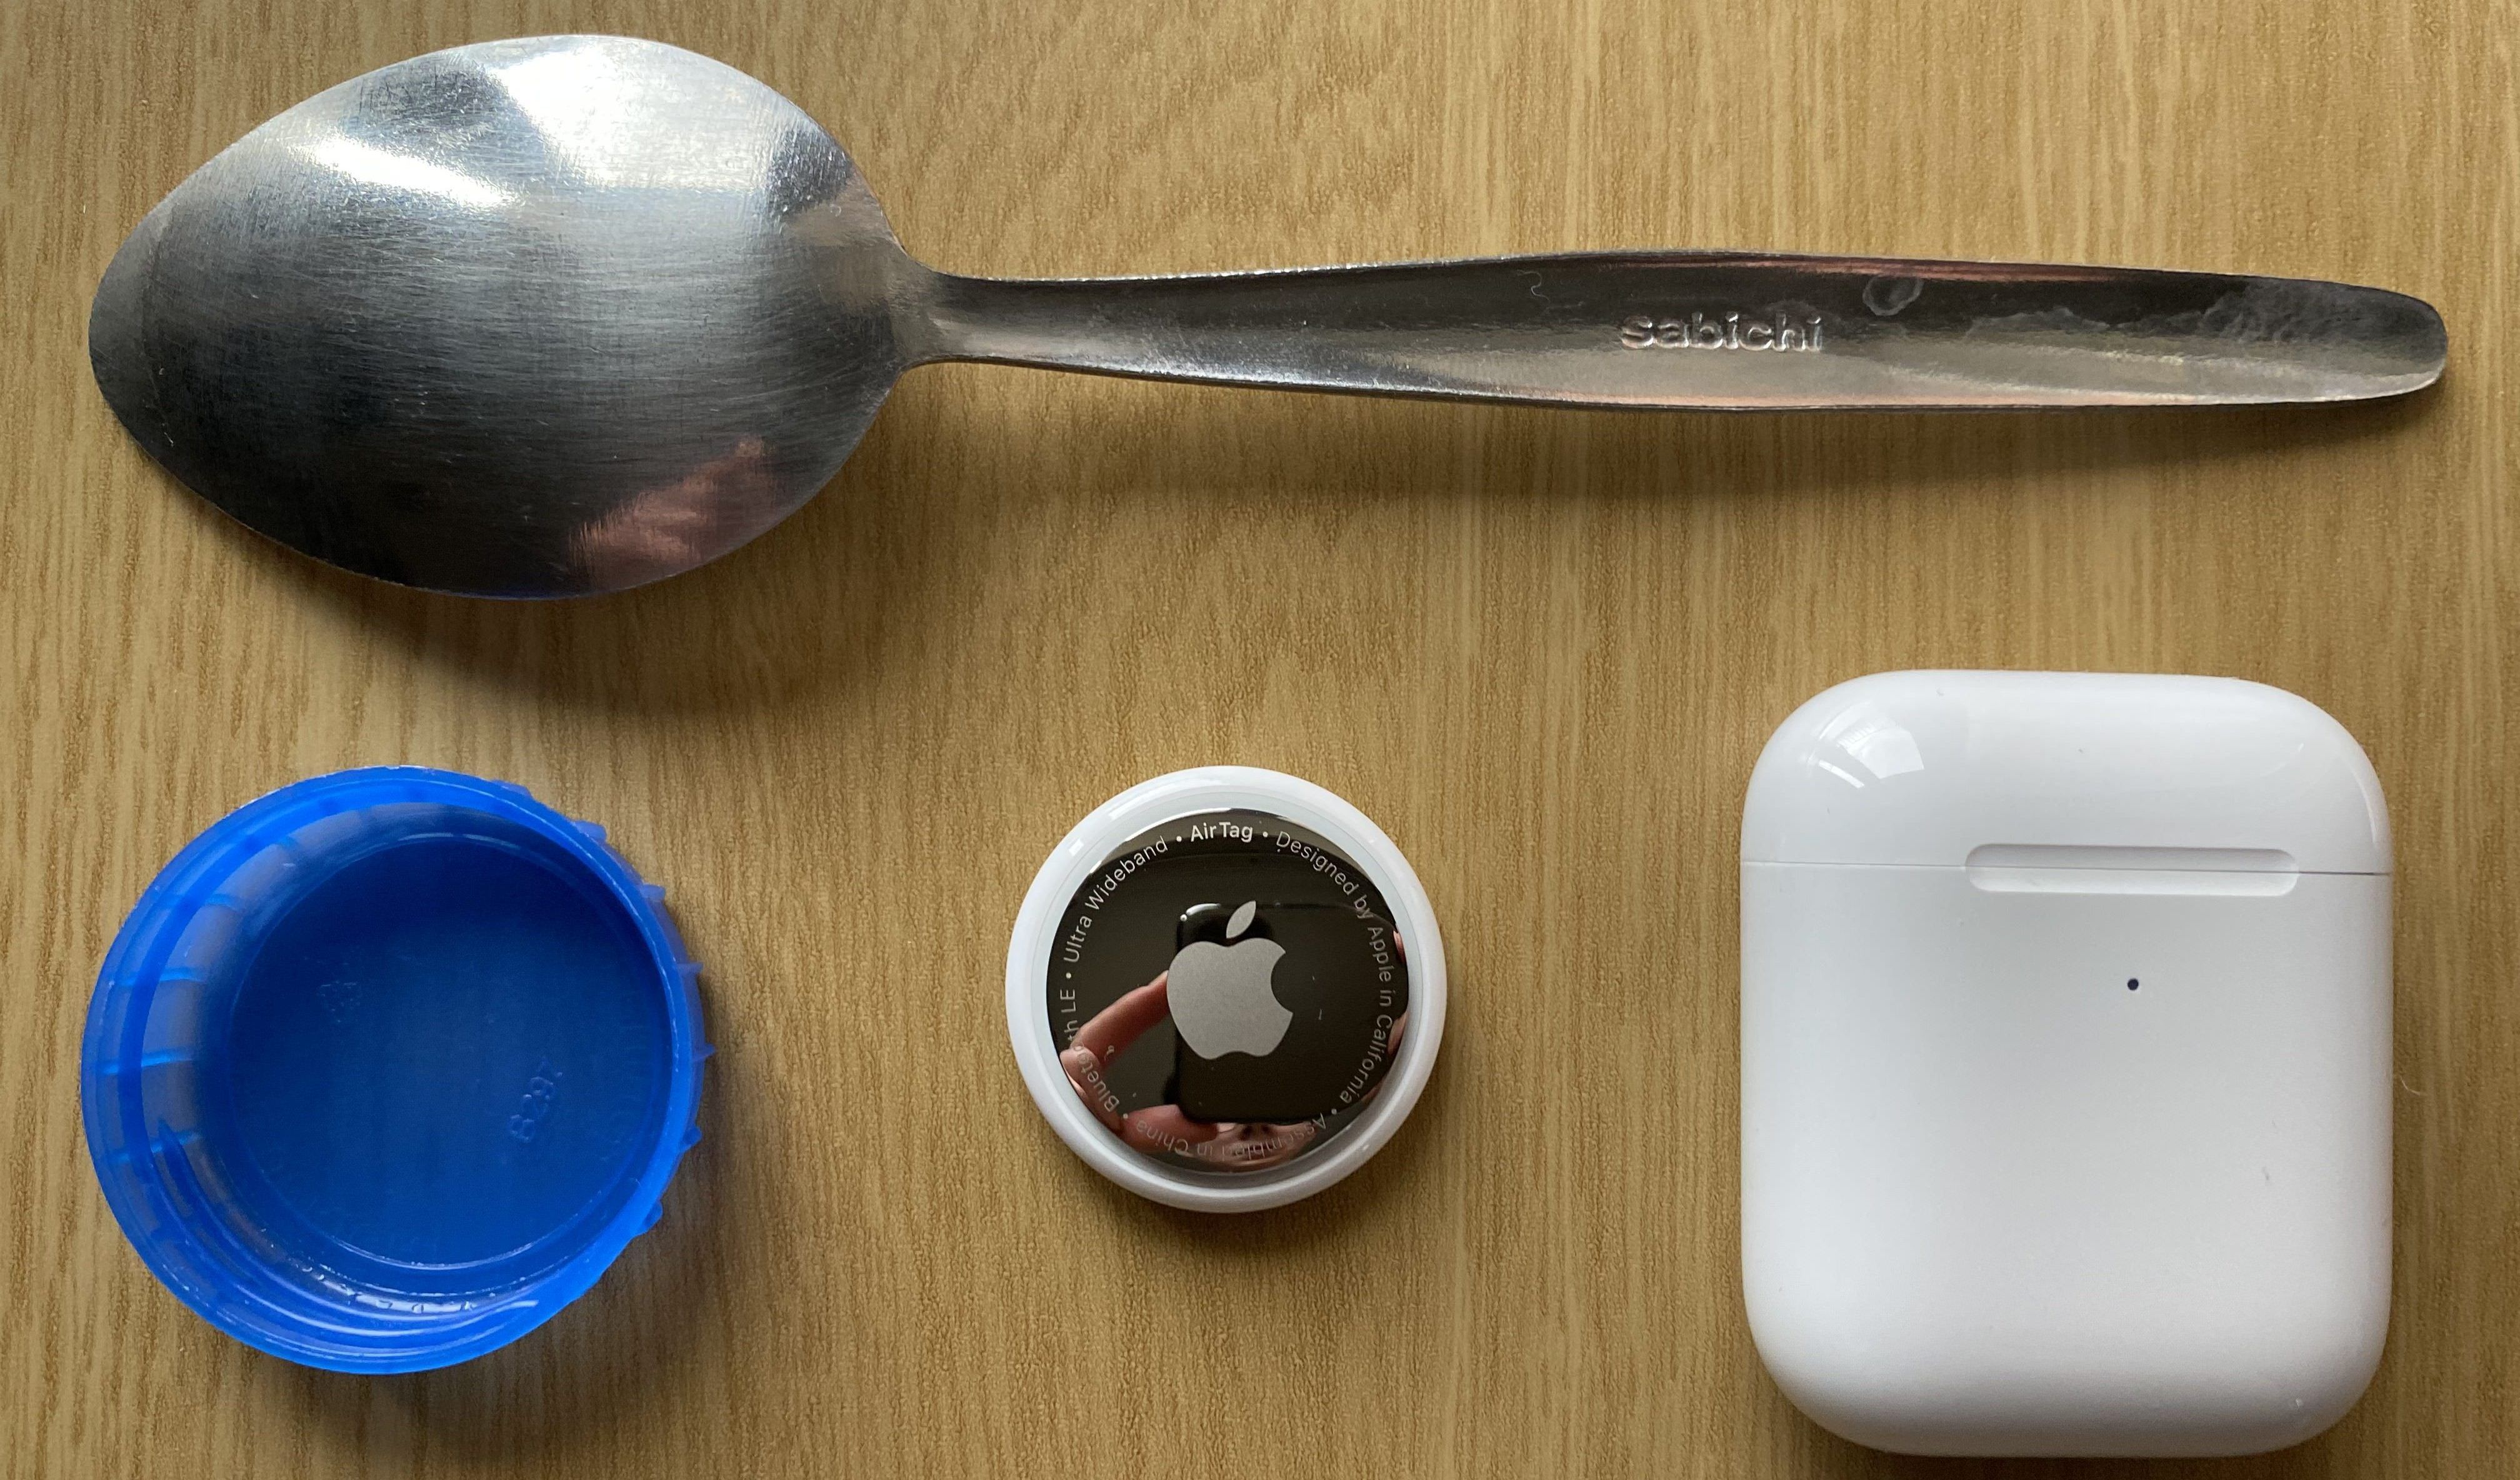 An AirTag next to a milk bottle cap, a spoon, and an AirPods case to show the size